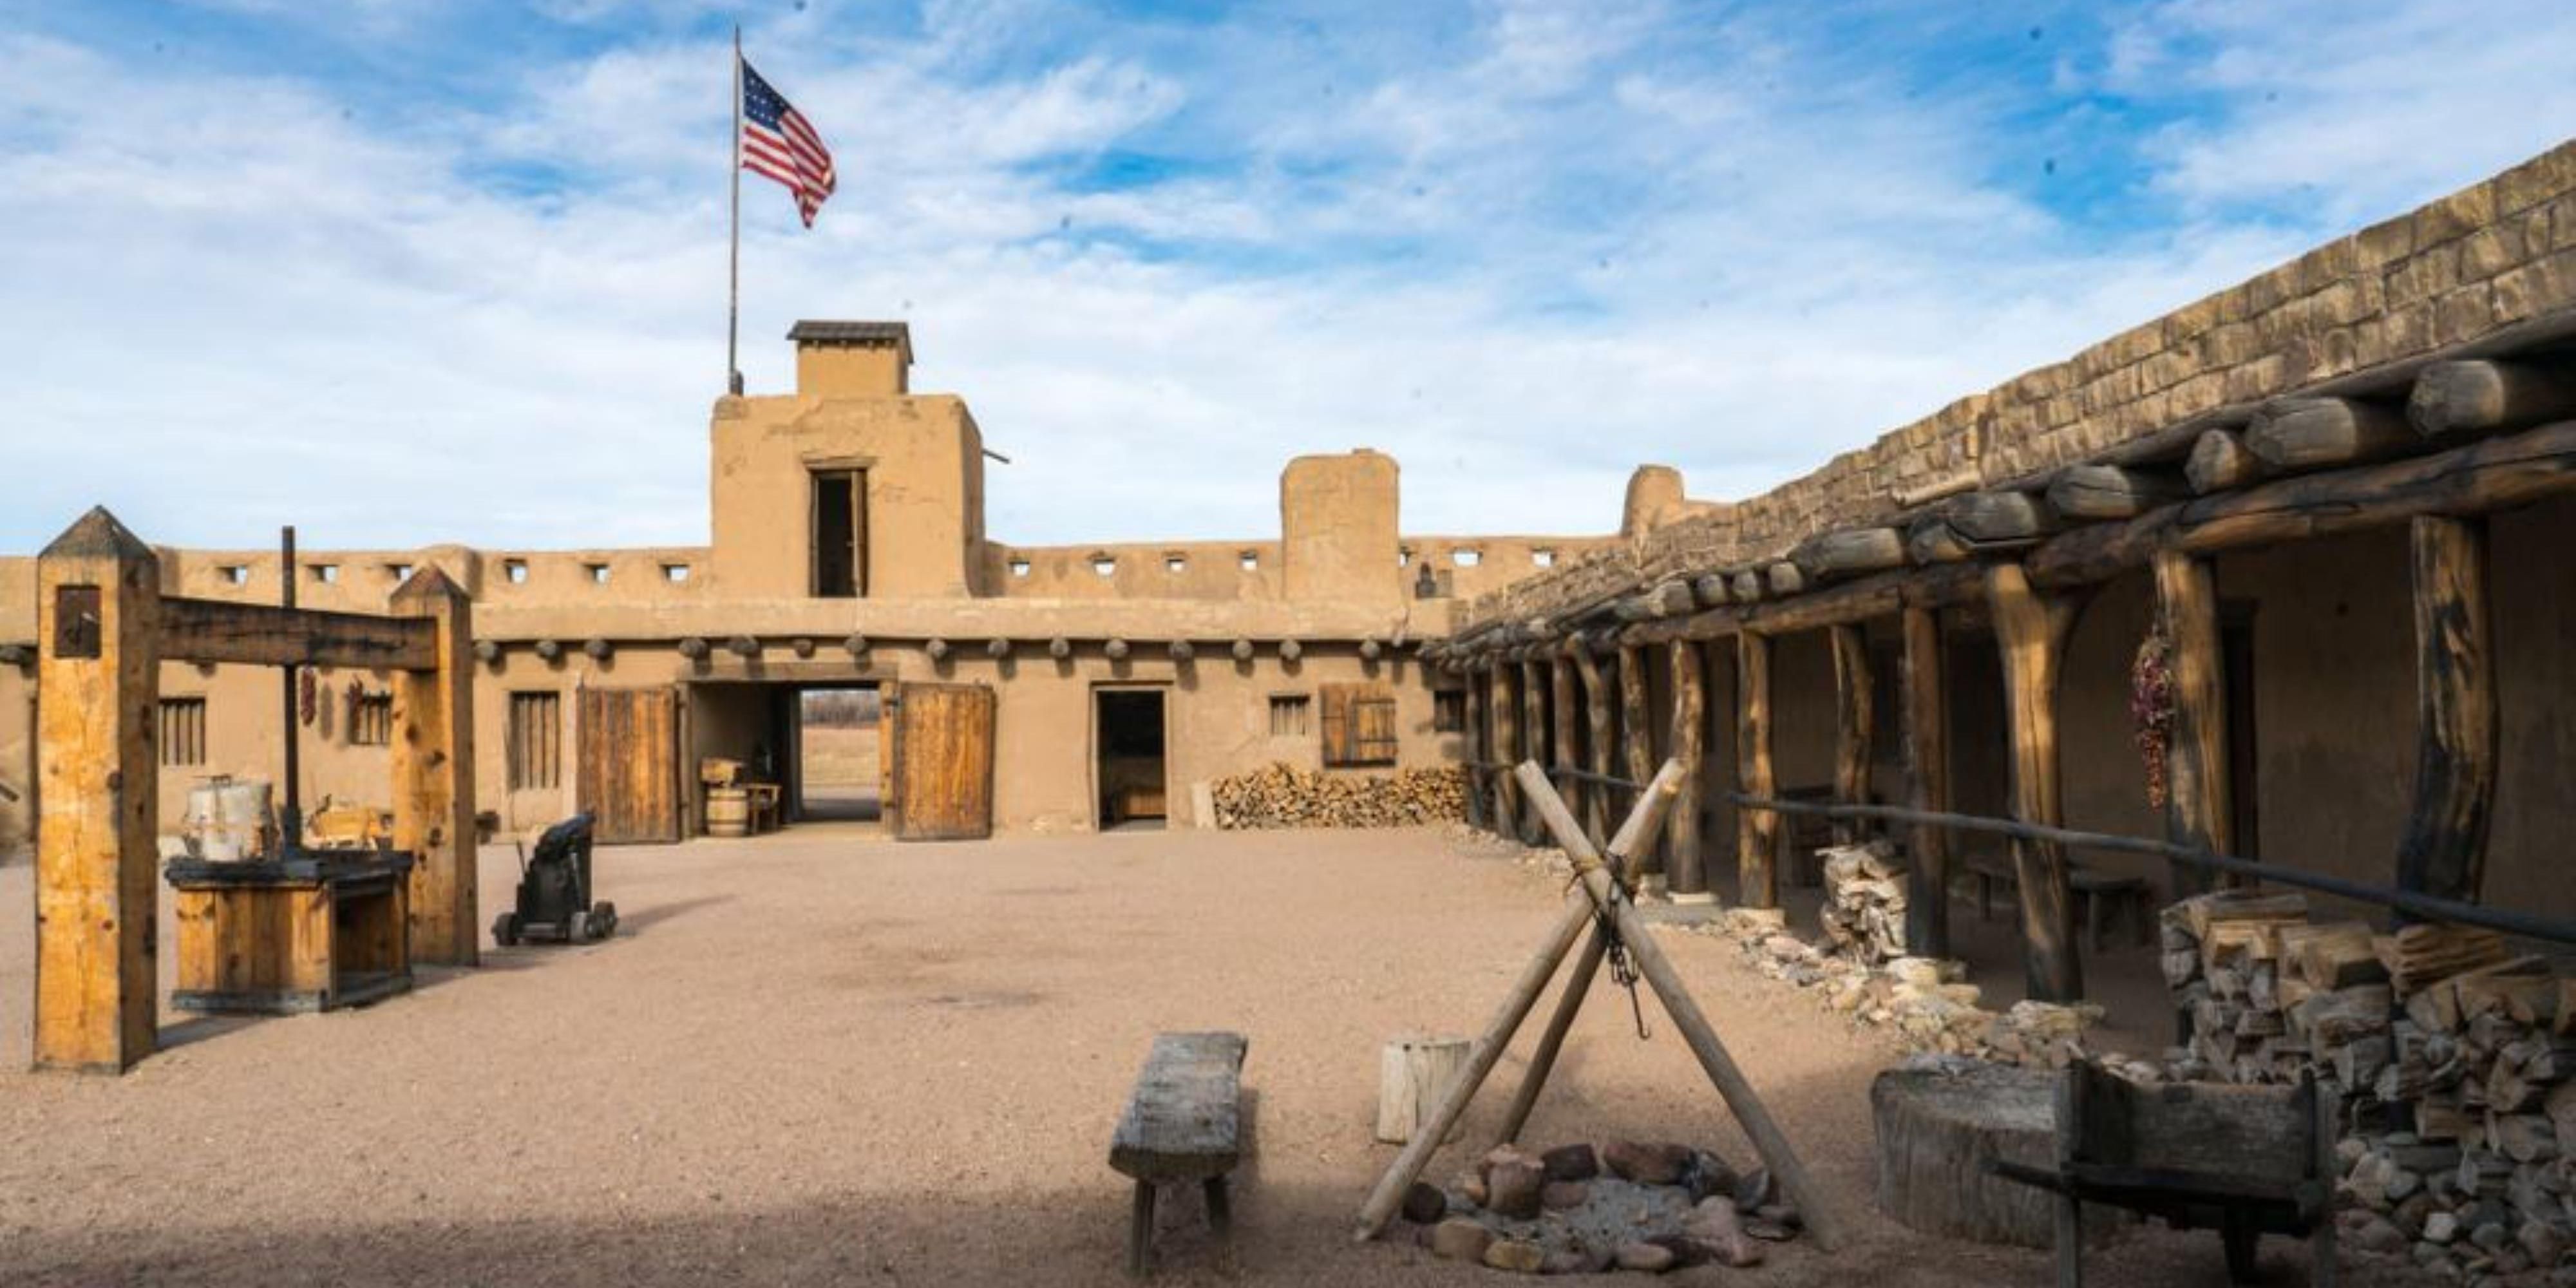 Bent’s Old Fort National Historic Site is located just five miles from La Junta and over 150 years back in time. This reconstructed trading post located on the Santa Fe Trail was the last United States outpost before crossing the Arkansas River and entering Mexico.